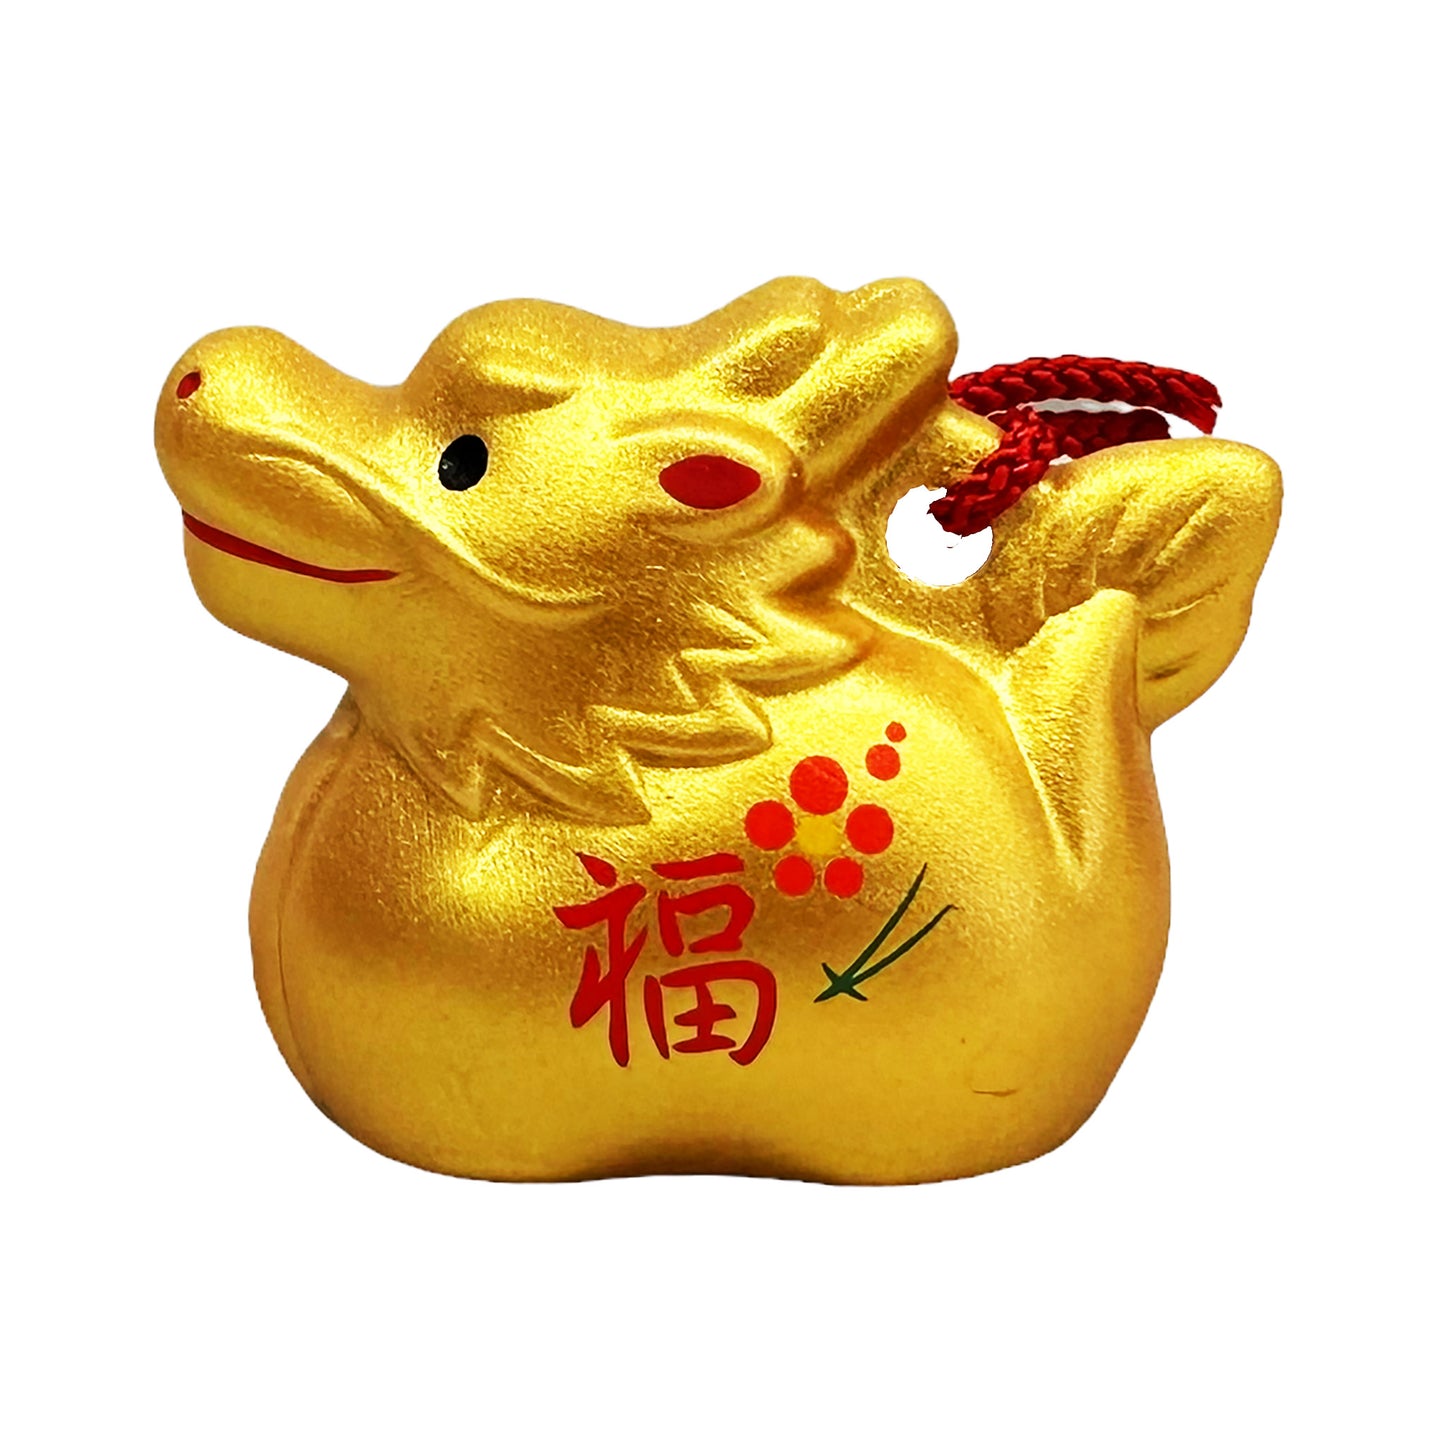 Front graphic image of Golden Dragon With Fu Character Bell Ornament Figurine 2.5 X 2 X 1.25 Inches